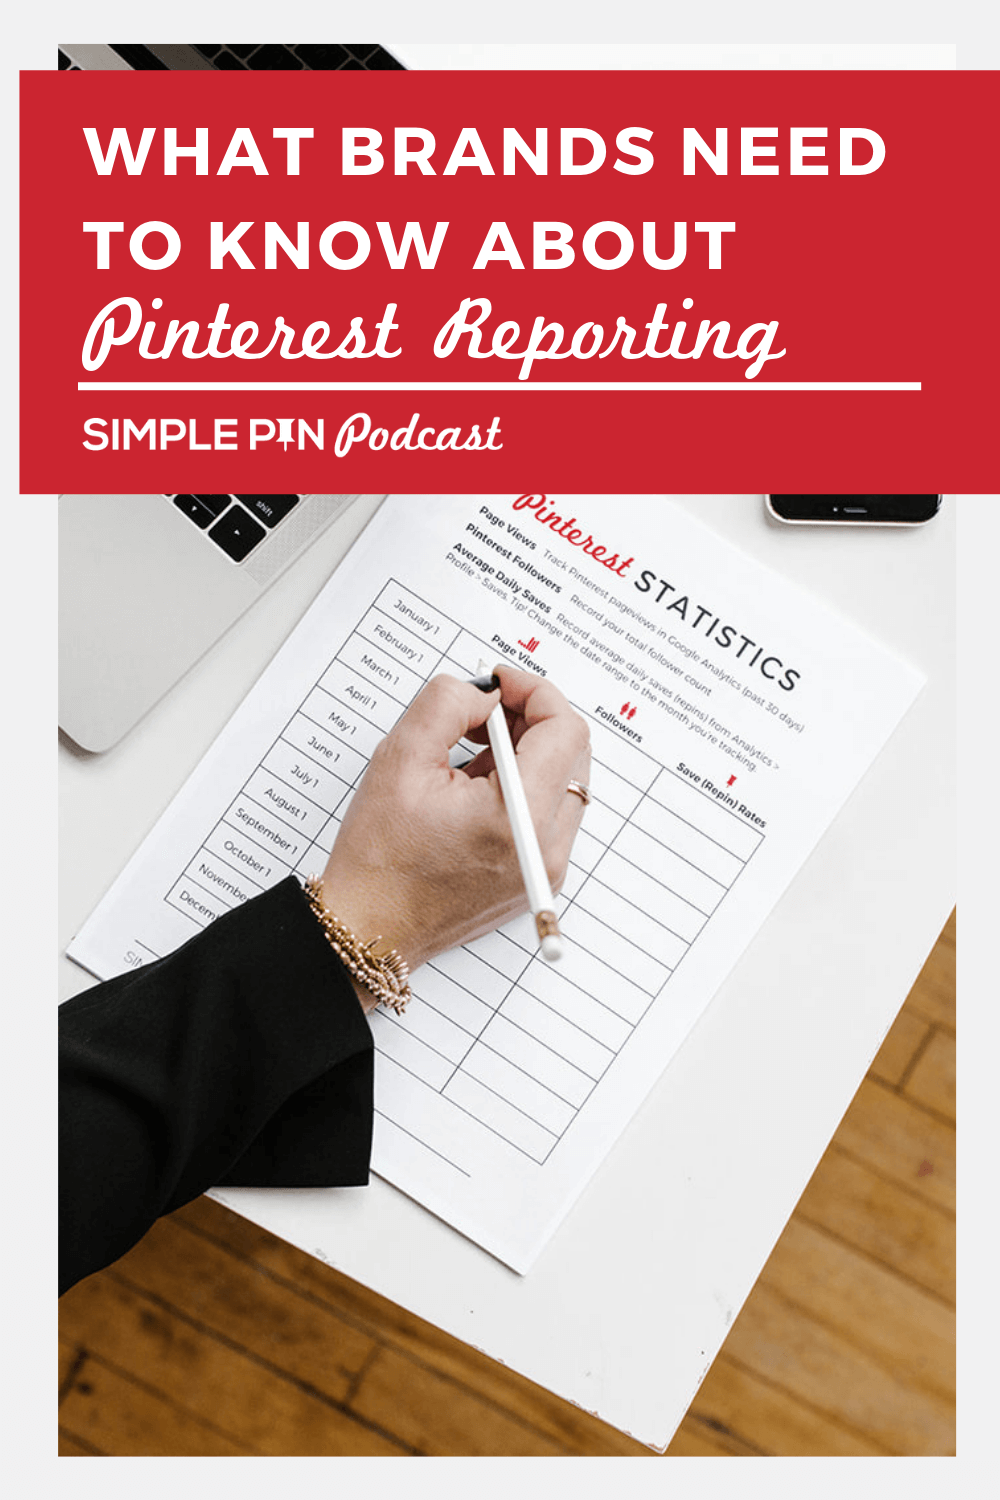 pinterest statistics sheet with text overlay "what brands need to know about pinterest reporting".